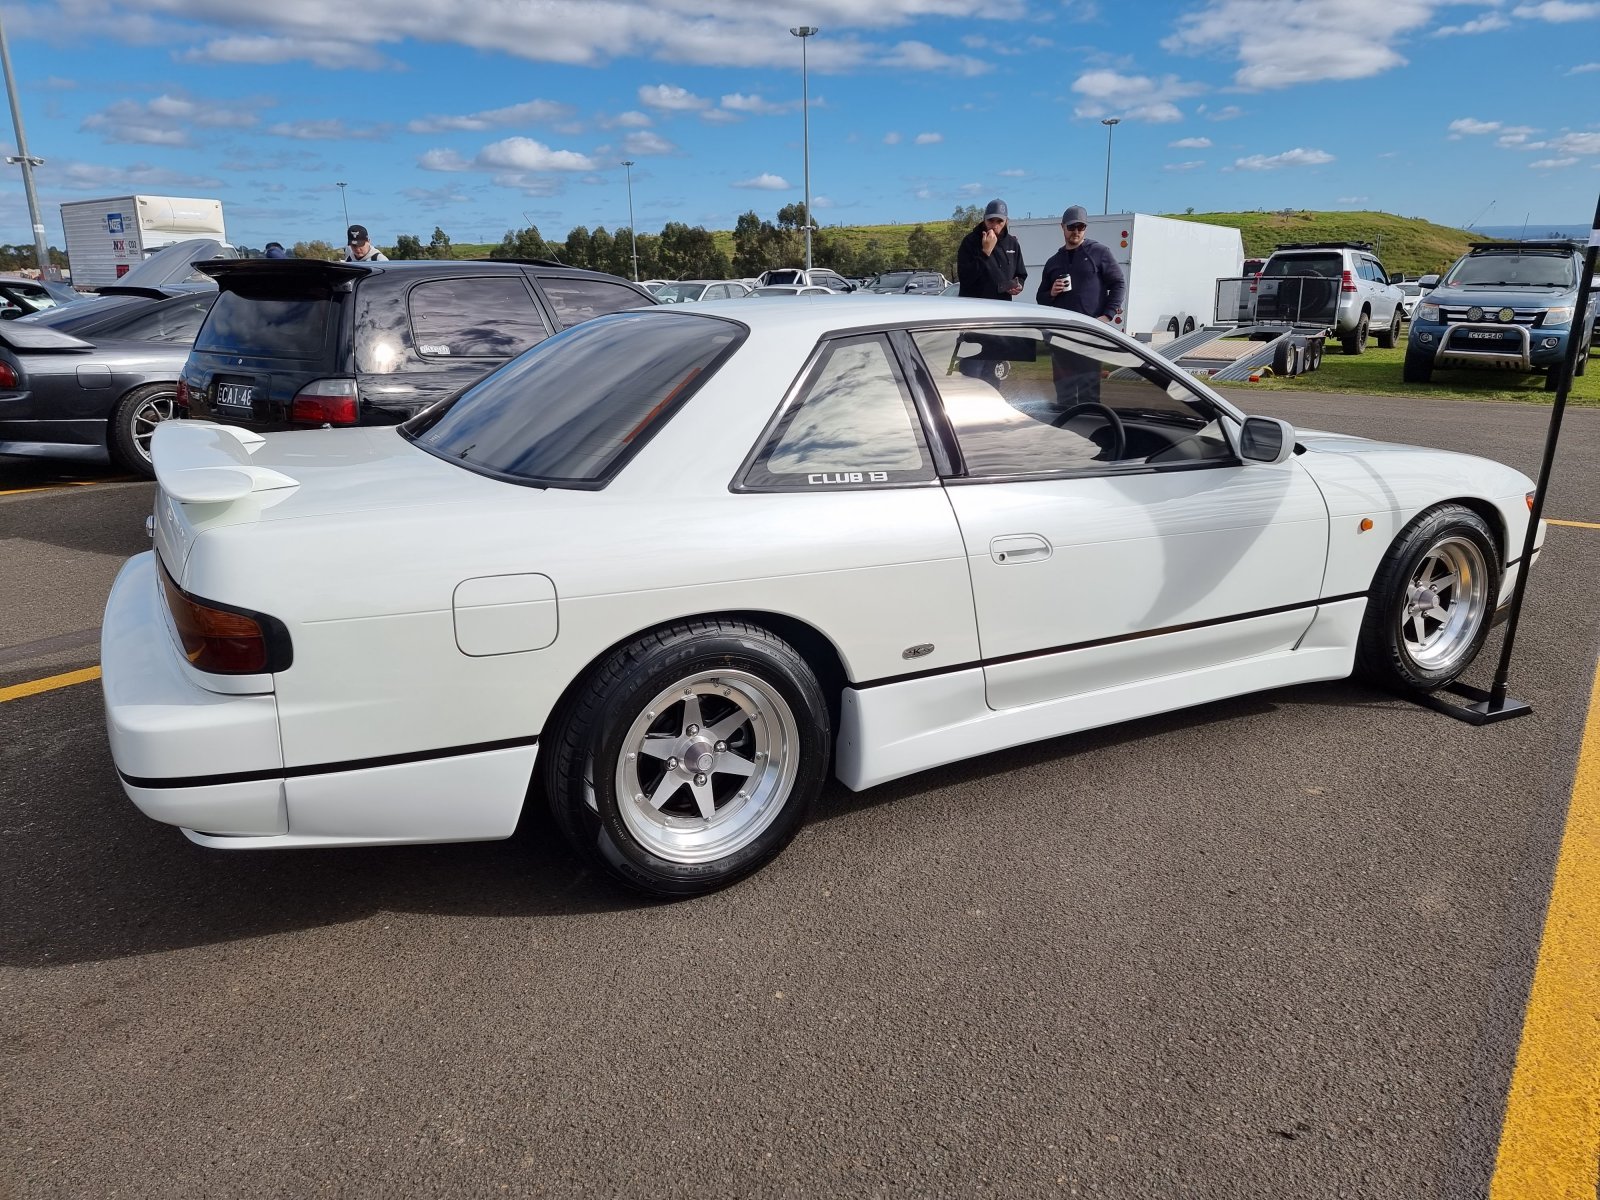 White S13 Silvia with Longchamps